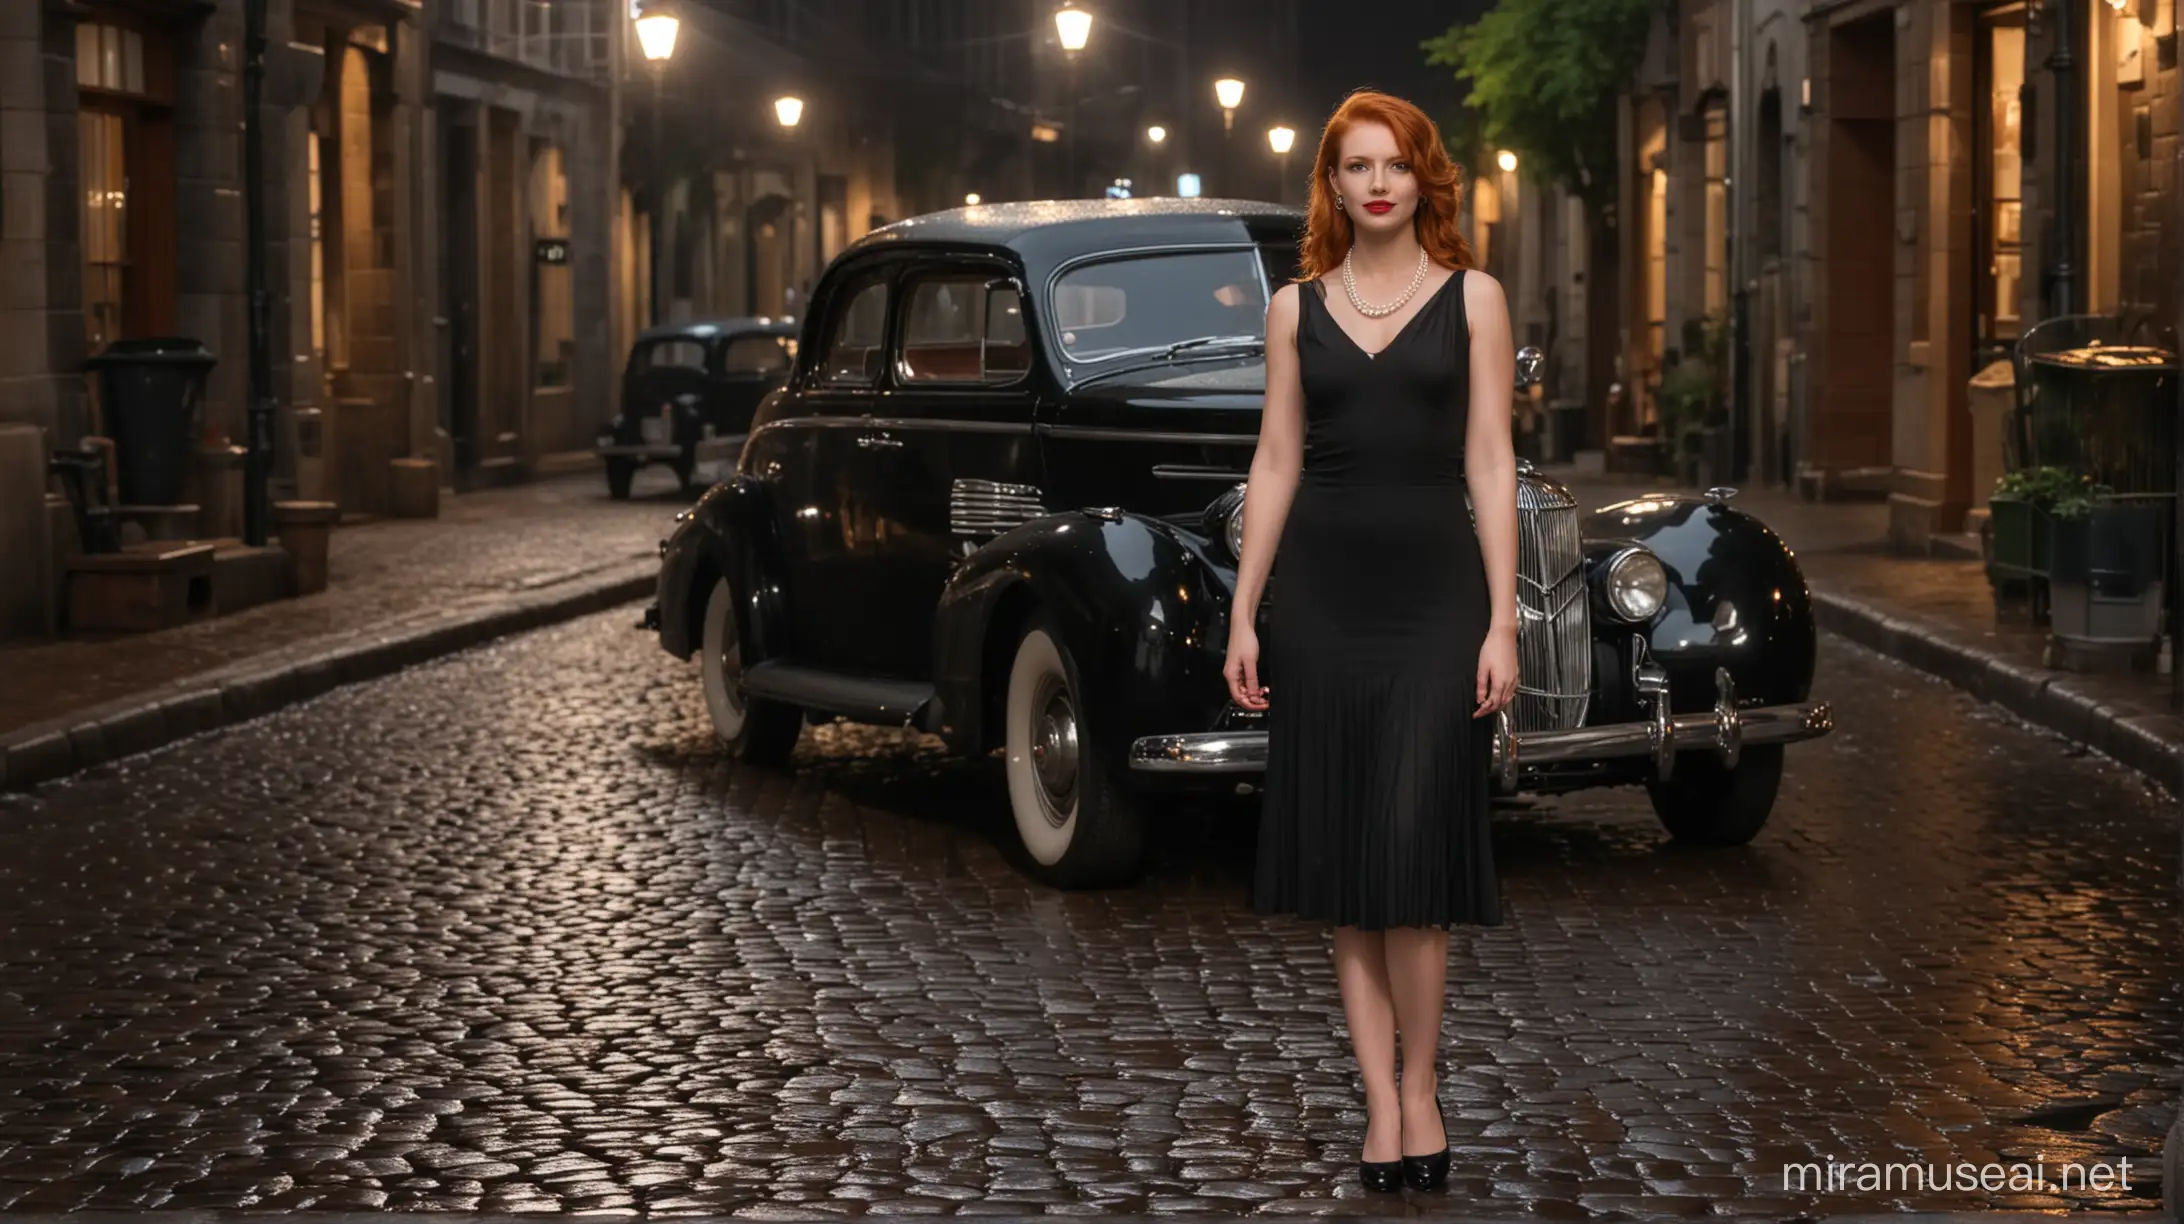 Vintage Elegance Redhead Woman with Pearls and 1940s Automobile on RainSoaked Cobblestone Street